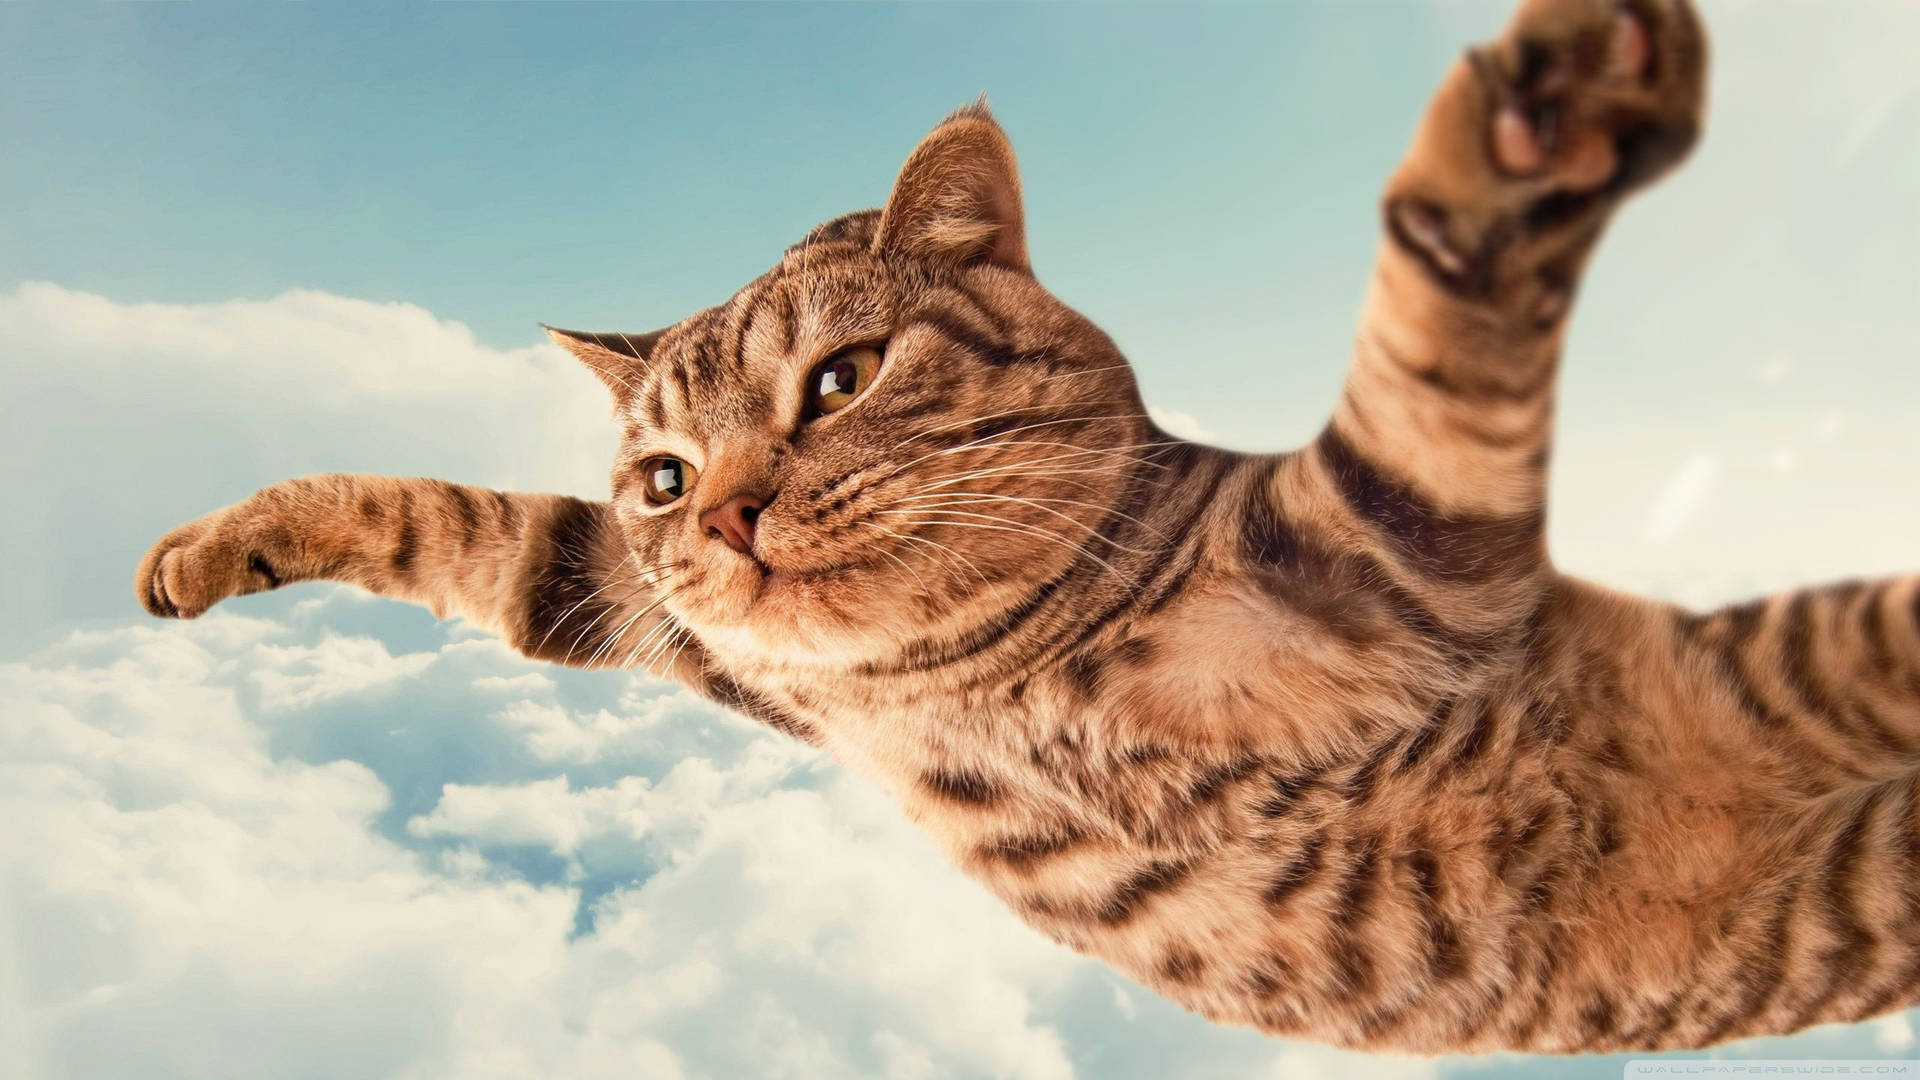 Funny Cat Flying Peacefully Wallpaper